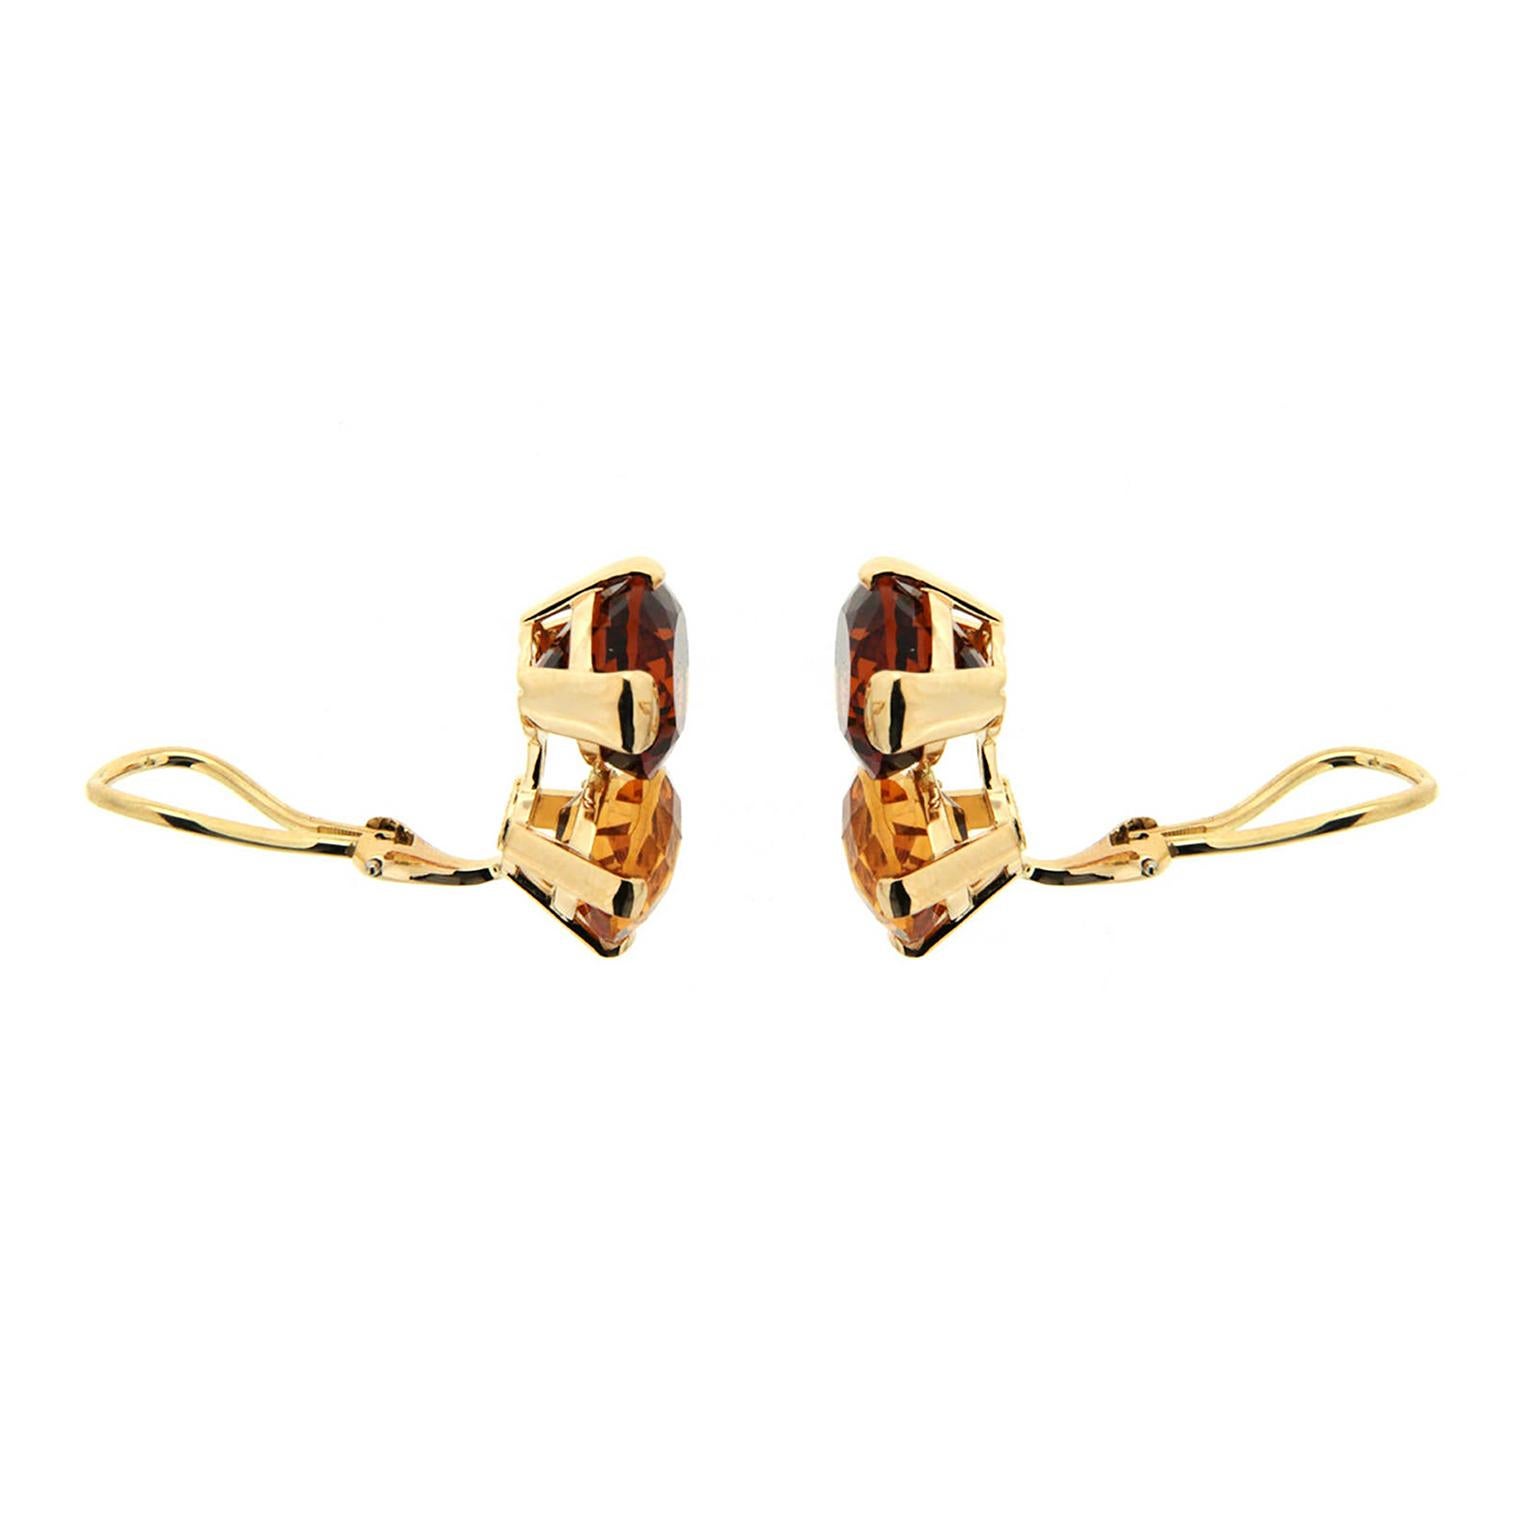 These earrings feature oval cut citrine stones and are finished with 18kt yellow gold clip backs. Posts can be added.

Valentin Magro is the artisan creating these stylish earrings. Having spent twenty-five years collaborating with the finest